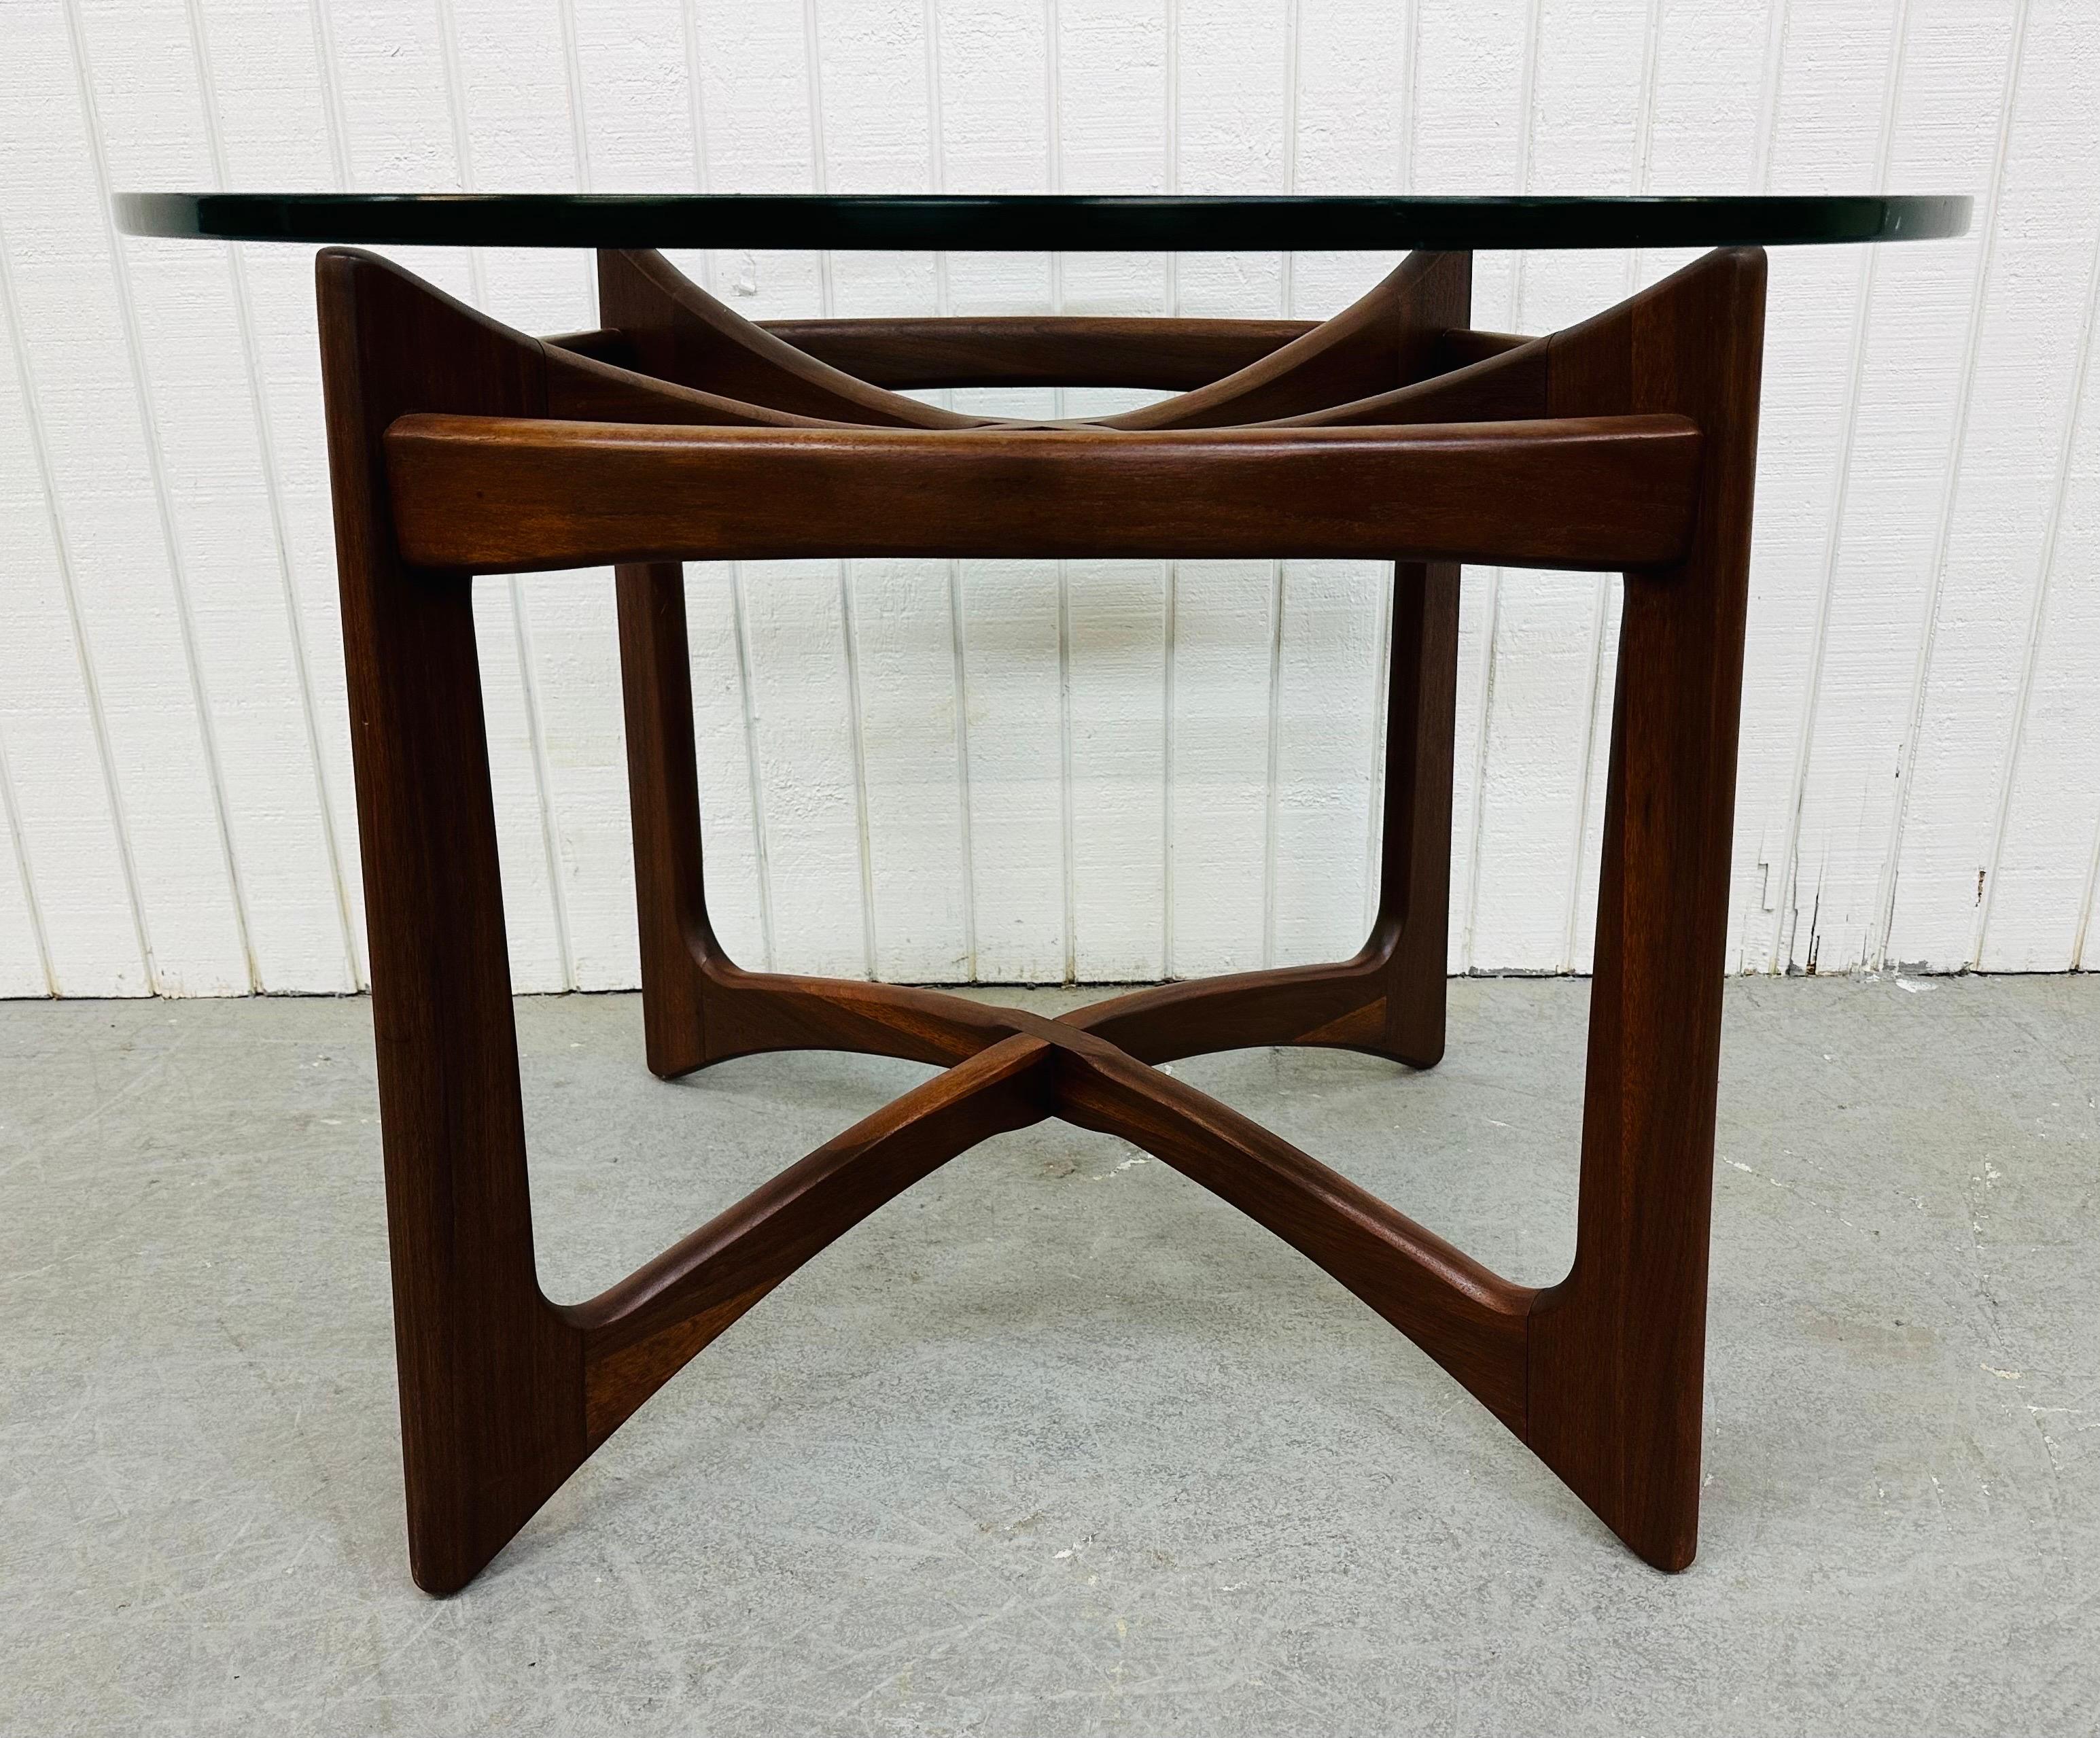 This listing is for a Mid-Century Modern Adrian Pearsall Walnut Compass Dining Table. Featuring a thick round glass top and a walnut compass style base. This is an exceptional combination of quality and design by Adrian Pearsall.